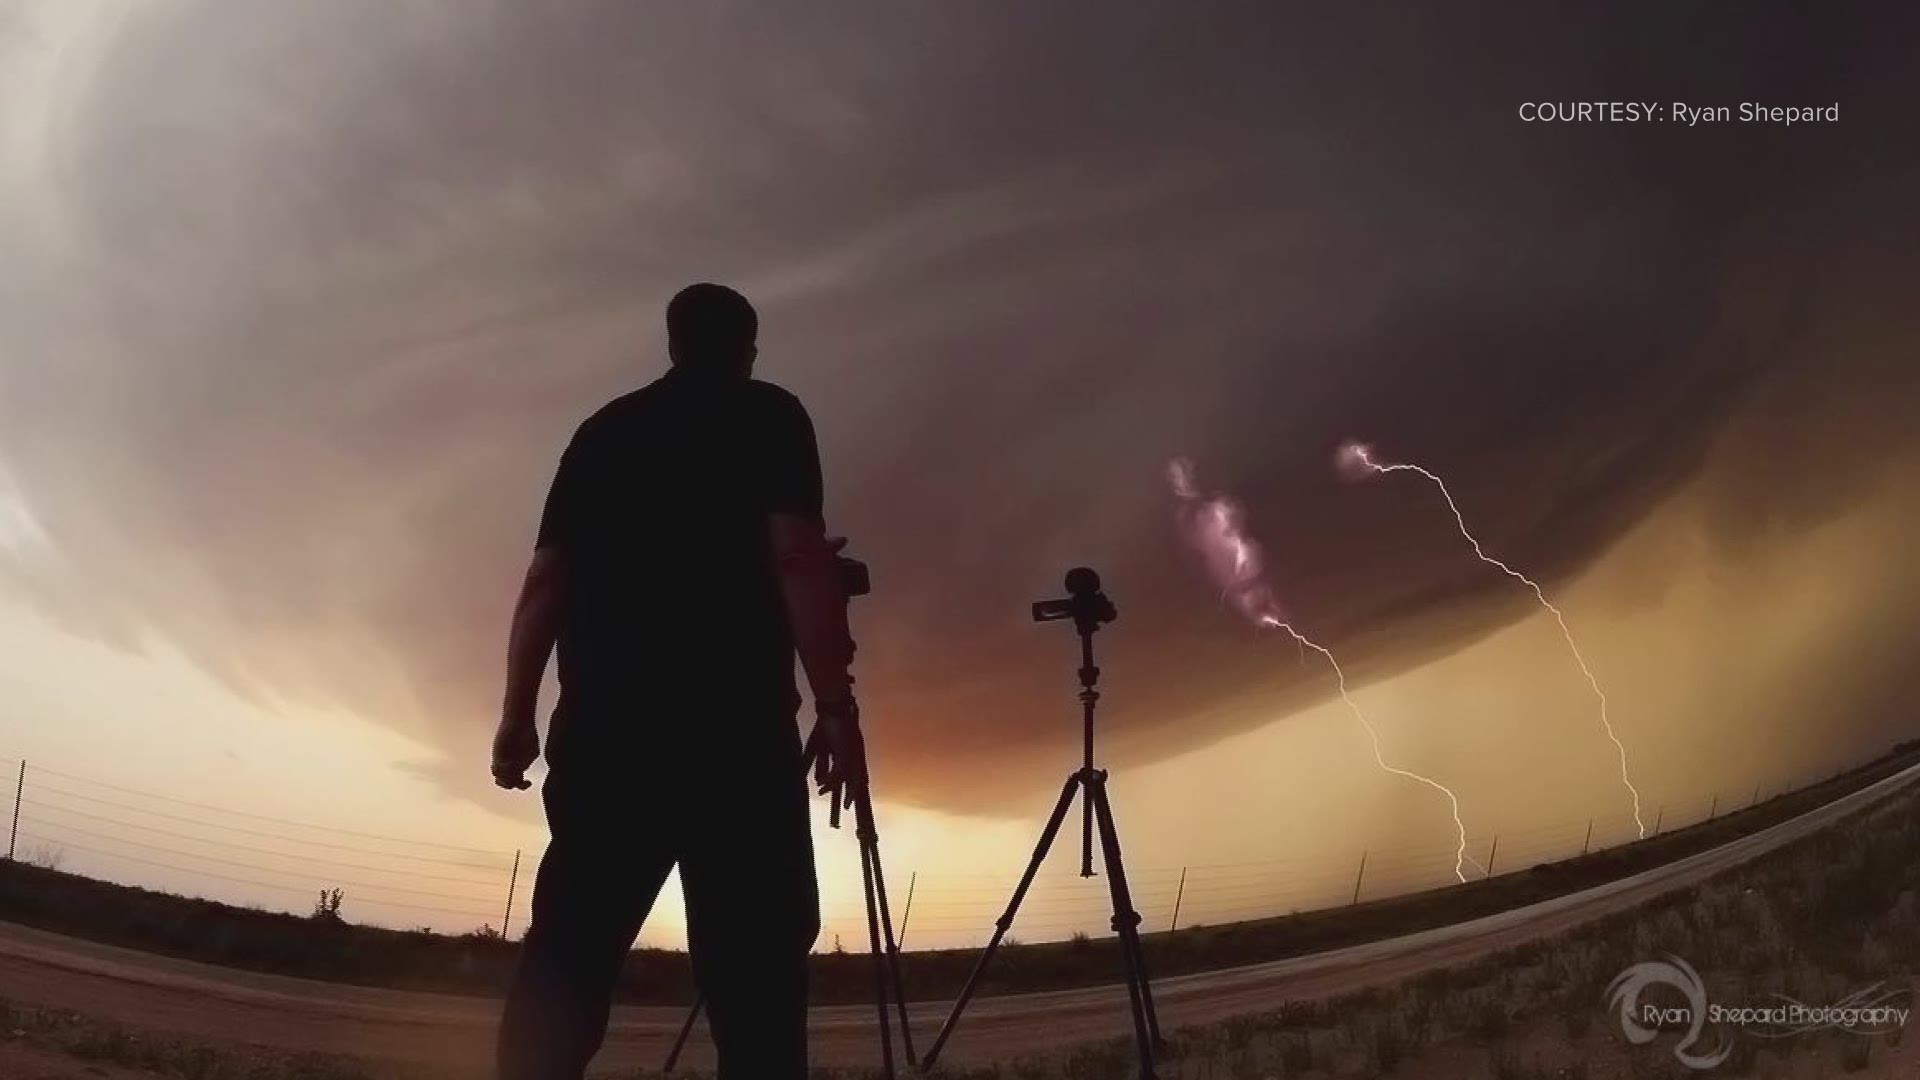 The 22-year-old ChaserCon tradition for storm chasers across the country is coming to an end.